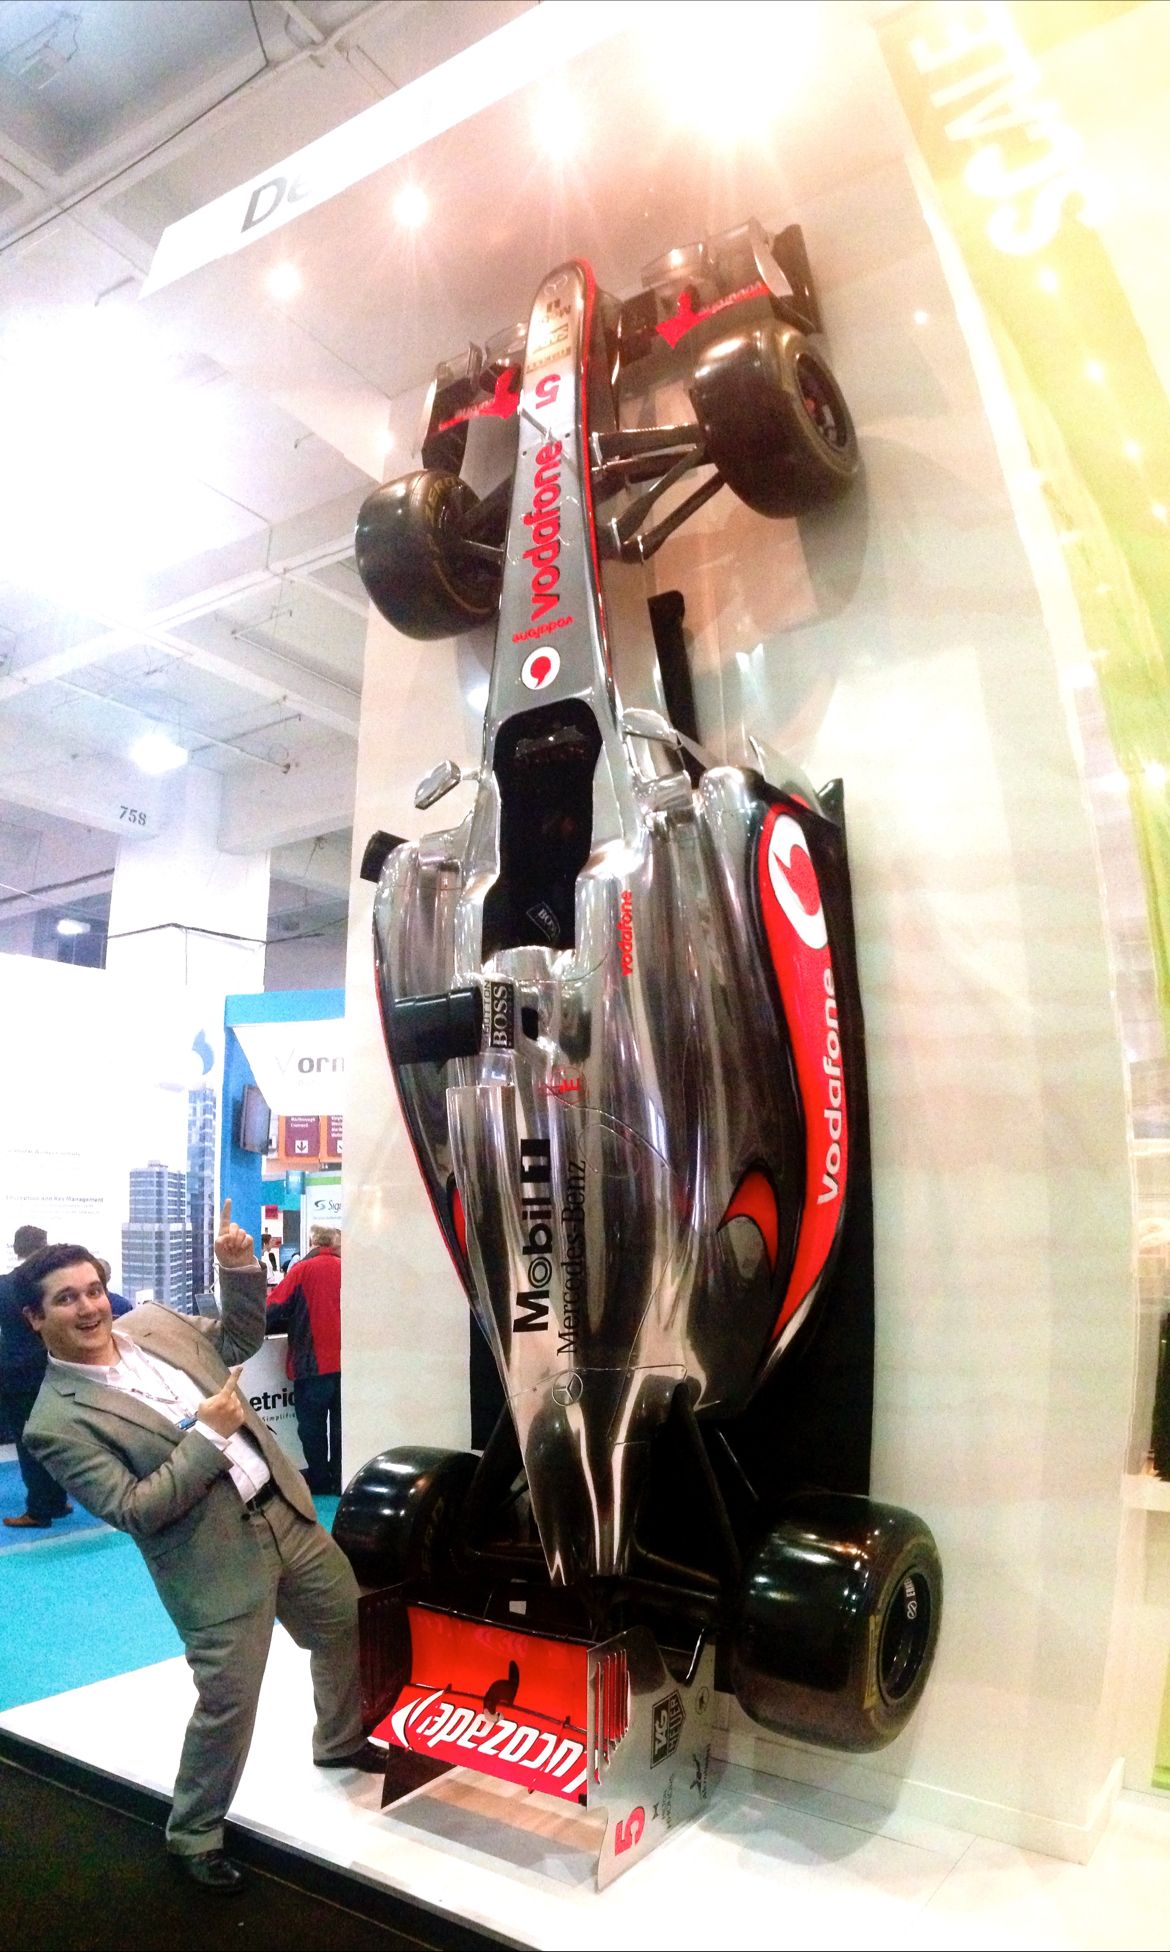 A McLaren Mercedes formula 1 car is mounted vertically to Detica’s 2013 stand at Infosec dwarfing Robin in the foreground pointing at it